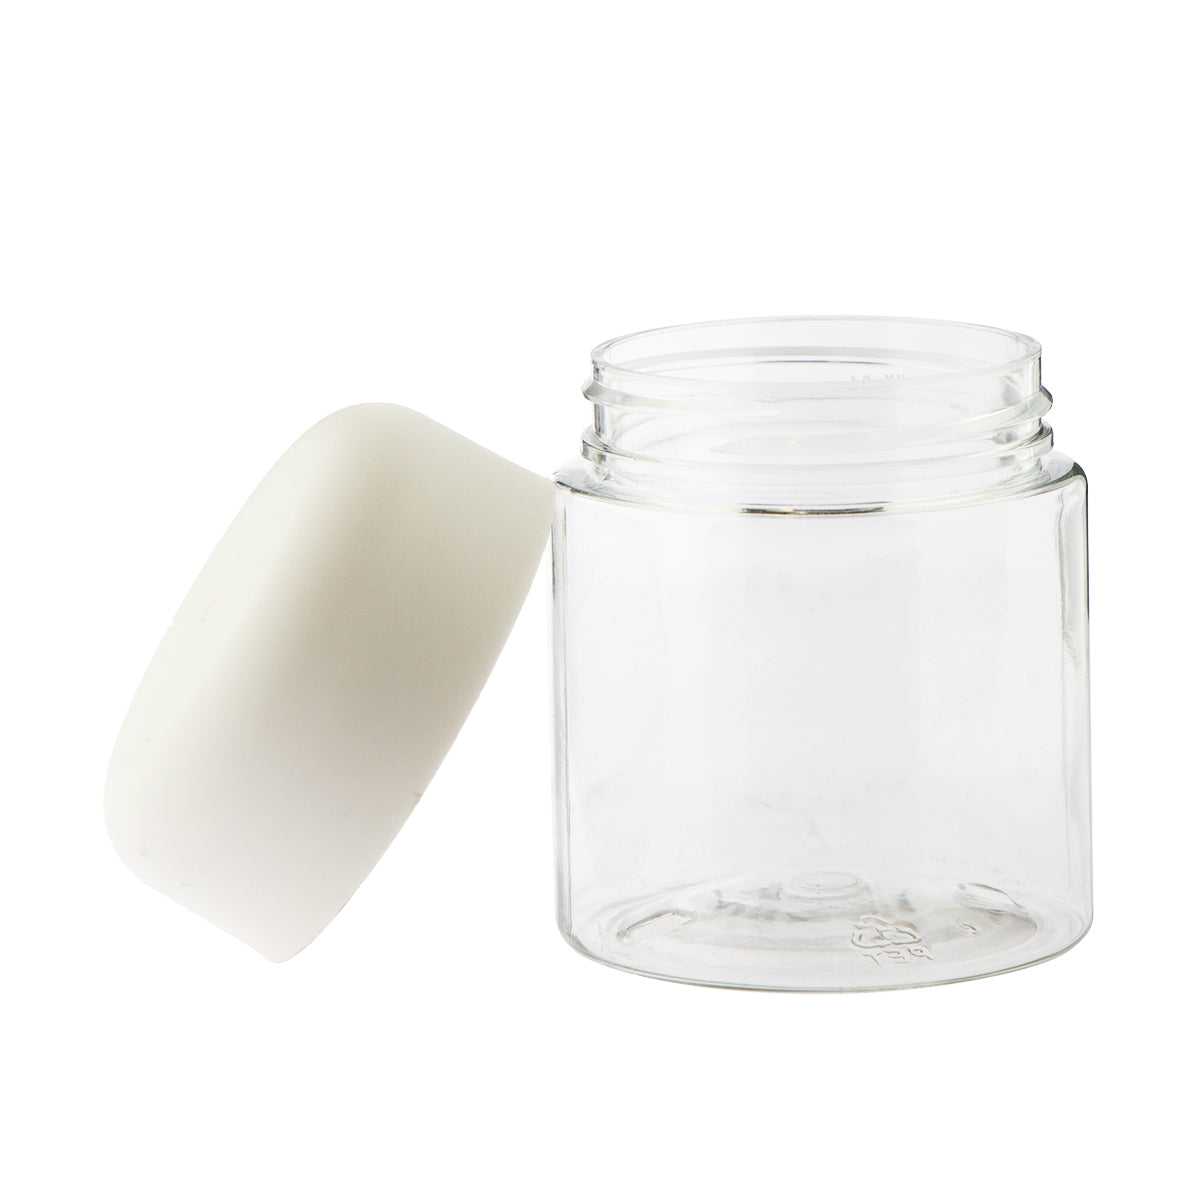 Child Resistant | Straight Sided Plastic Jars w/ Dome Caps - Clear/White | 53mm - 4oz - 100 Count